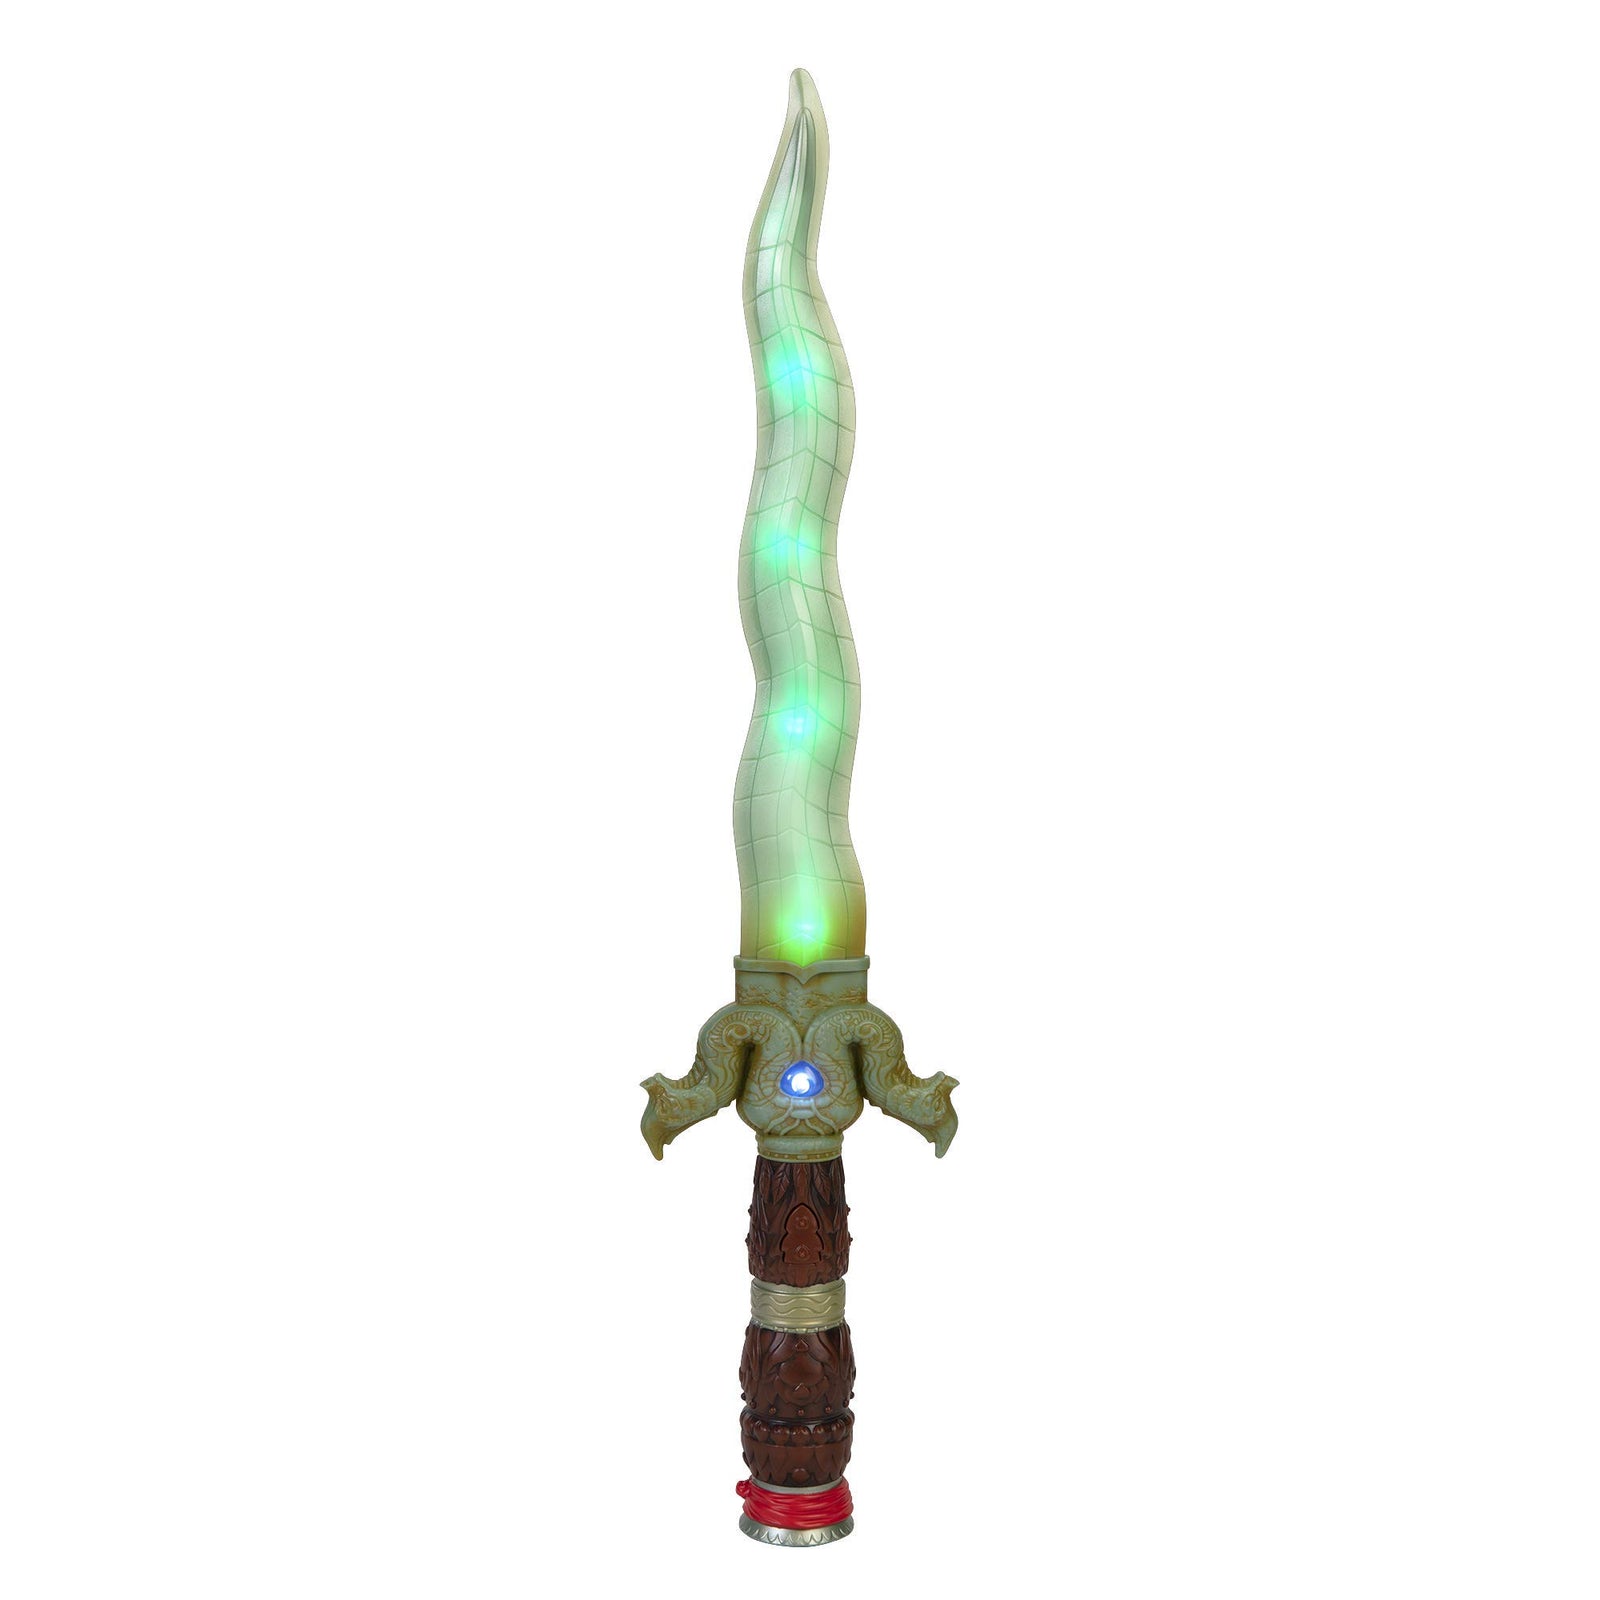 Disney's Raya and the Last Dragon Feature Dragon Blade - Action & Adventure Sword - Motion Activated with Lights & Sounds , Green